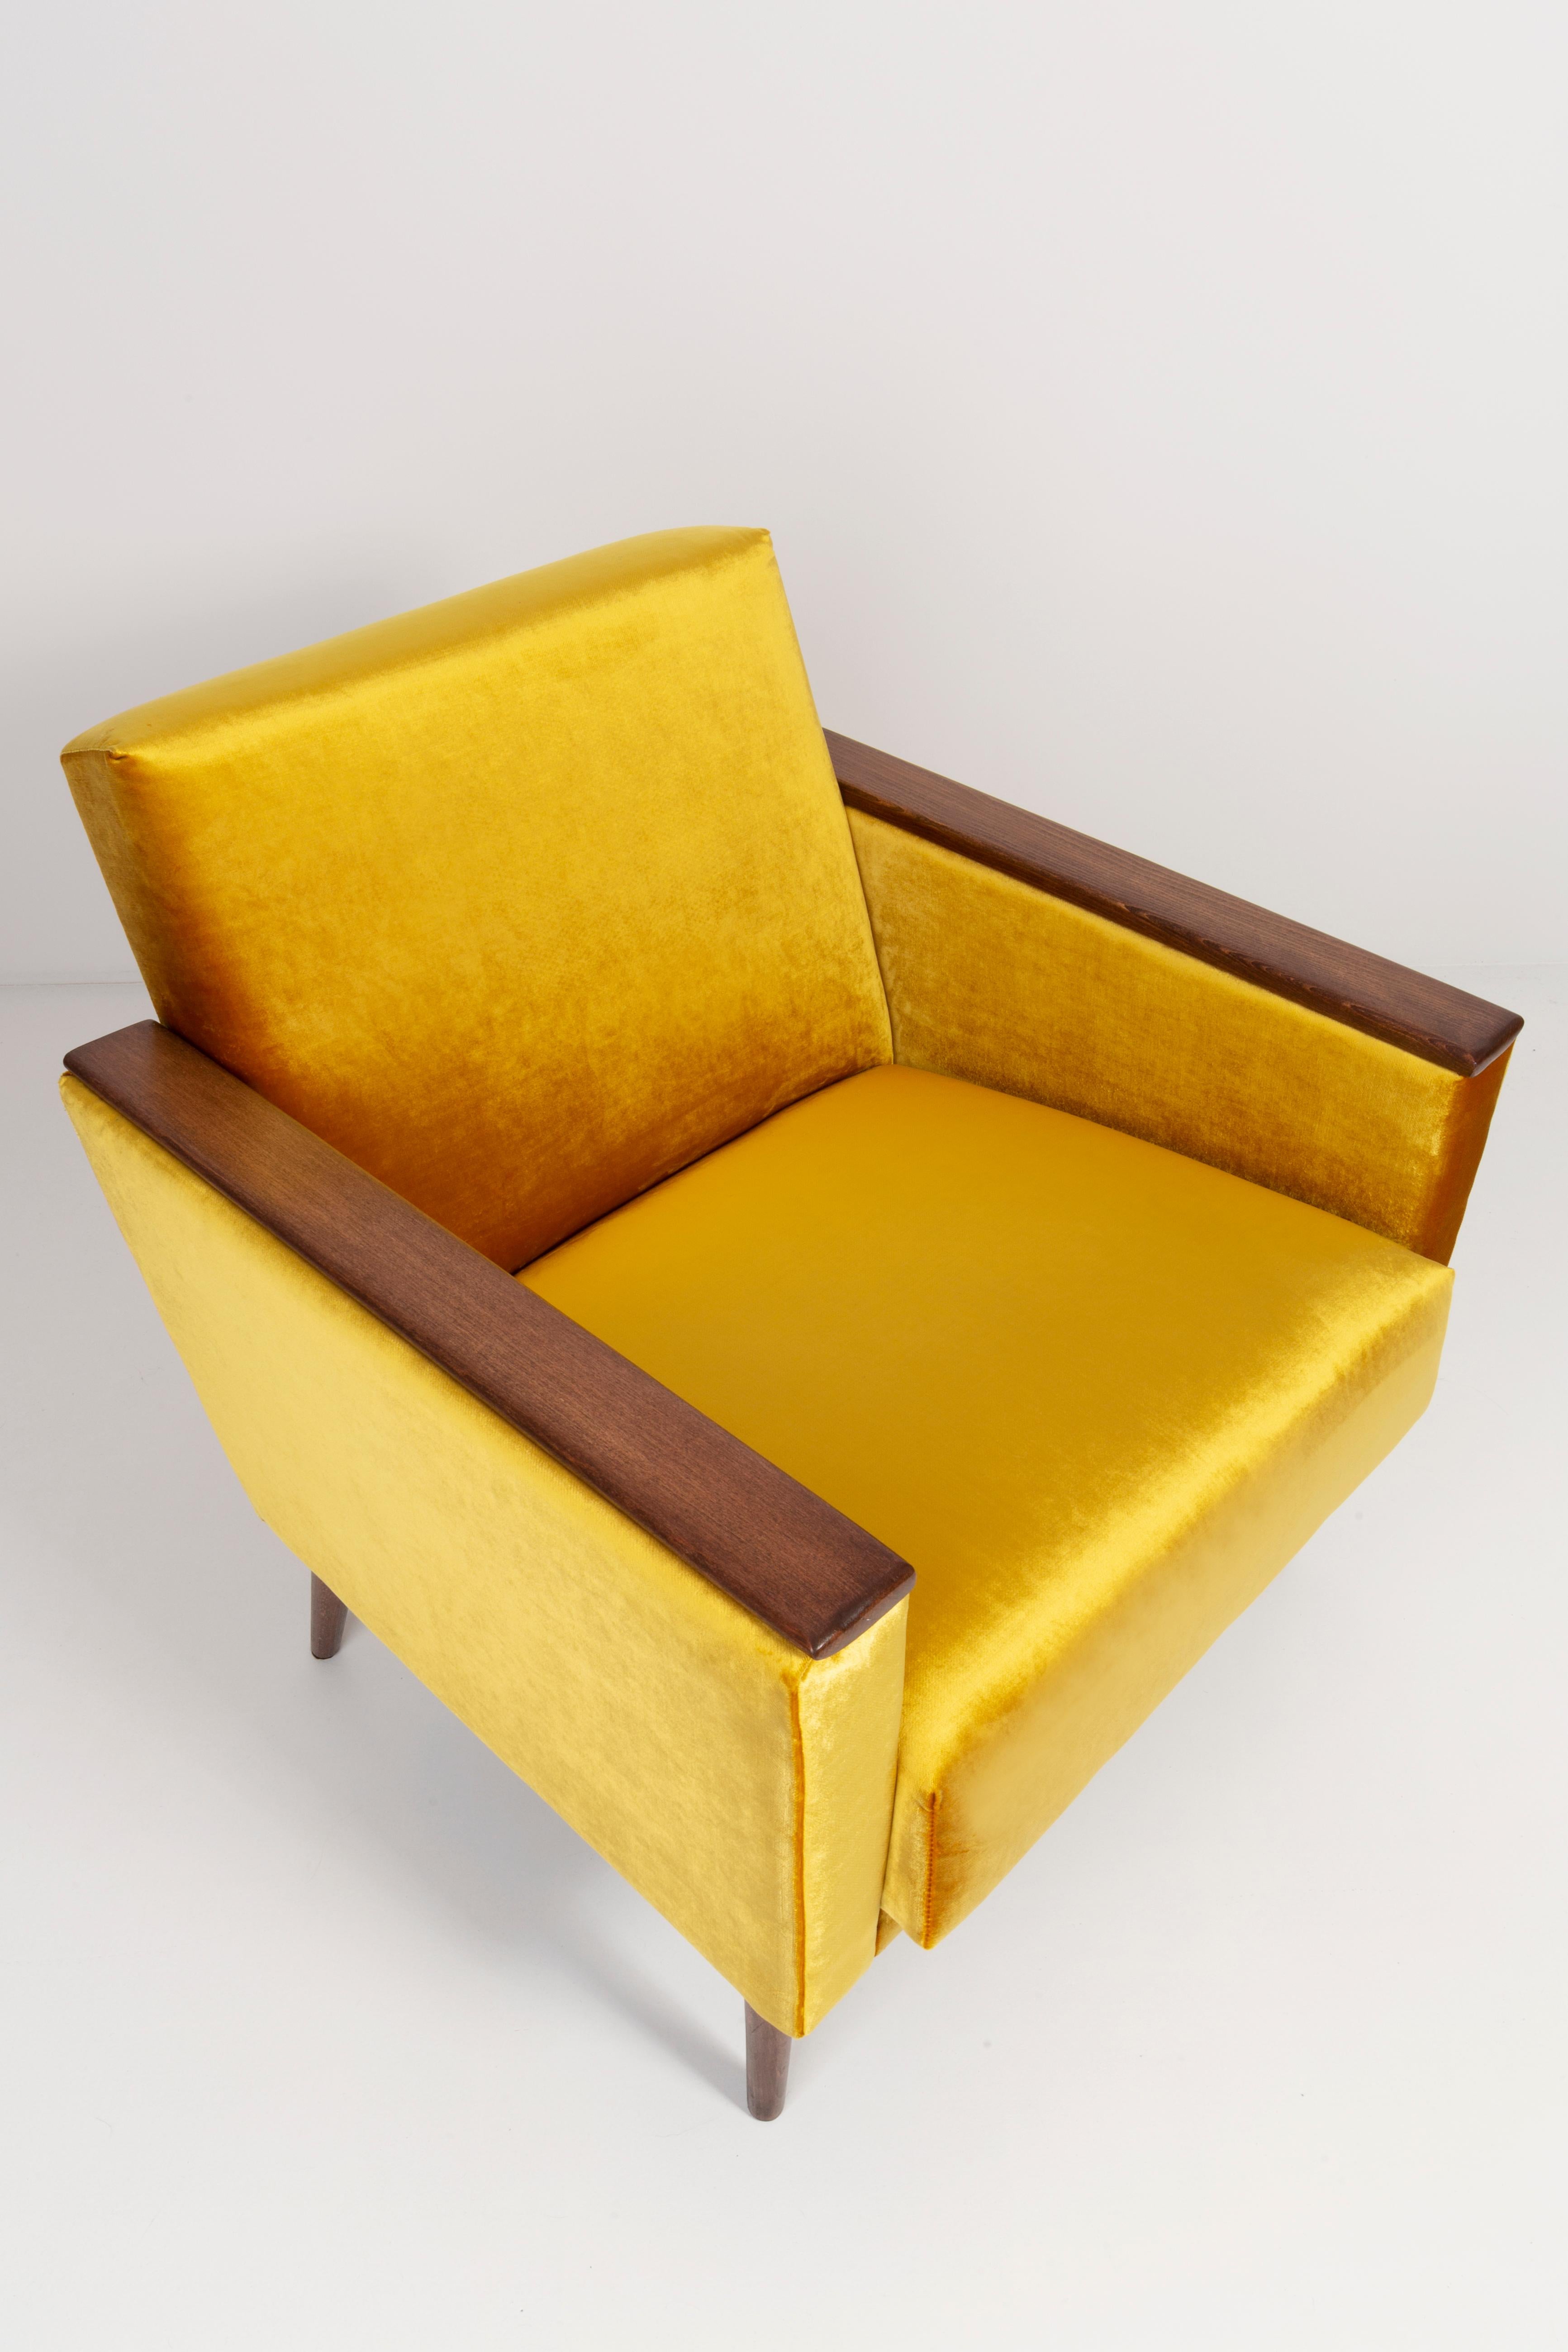 German armchair produced in the 1960s in Berlin. The armchair is after a thorough renovation of upholstery and carpentry. The wooden frame is thoroughly cleaned and covered with a semi-matte varnish in the color of a nut. The upholstery is made of